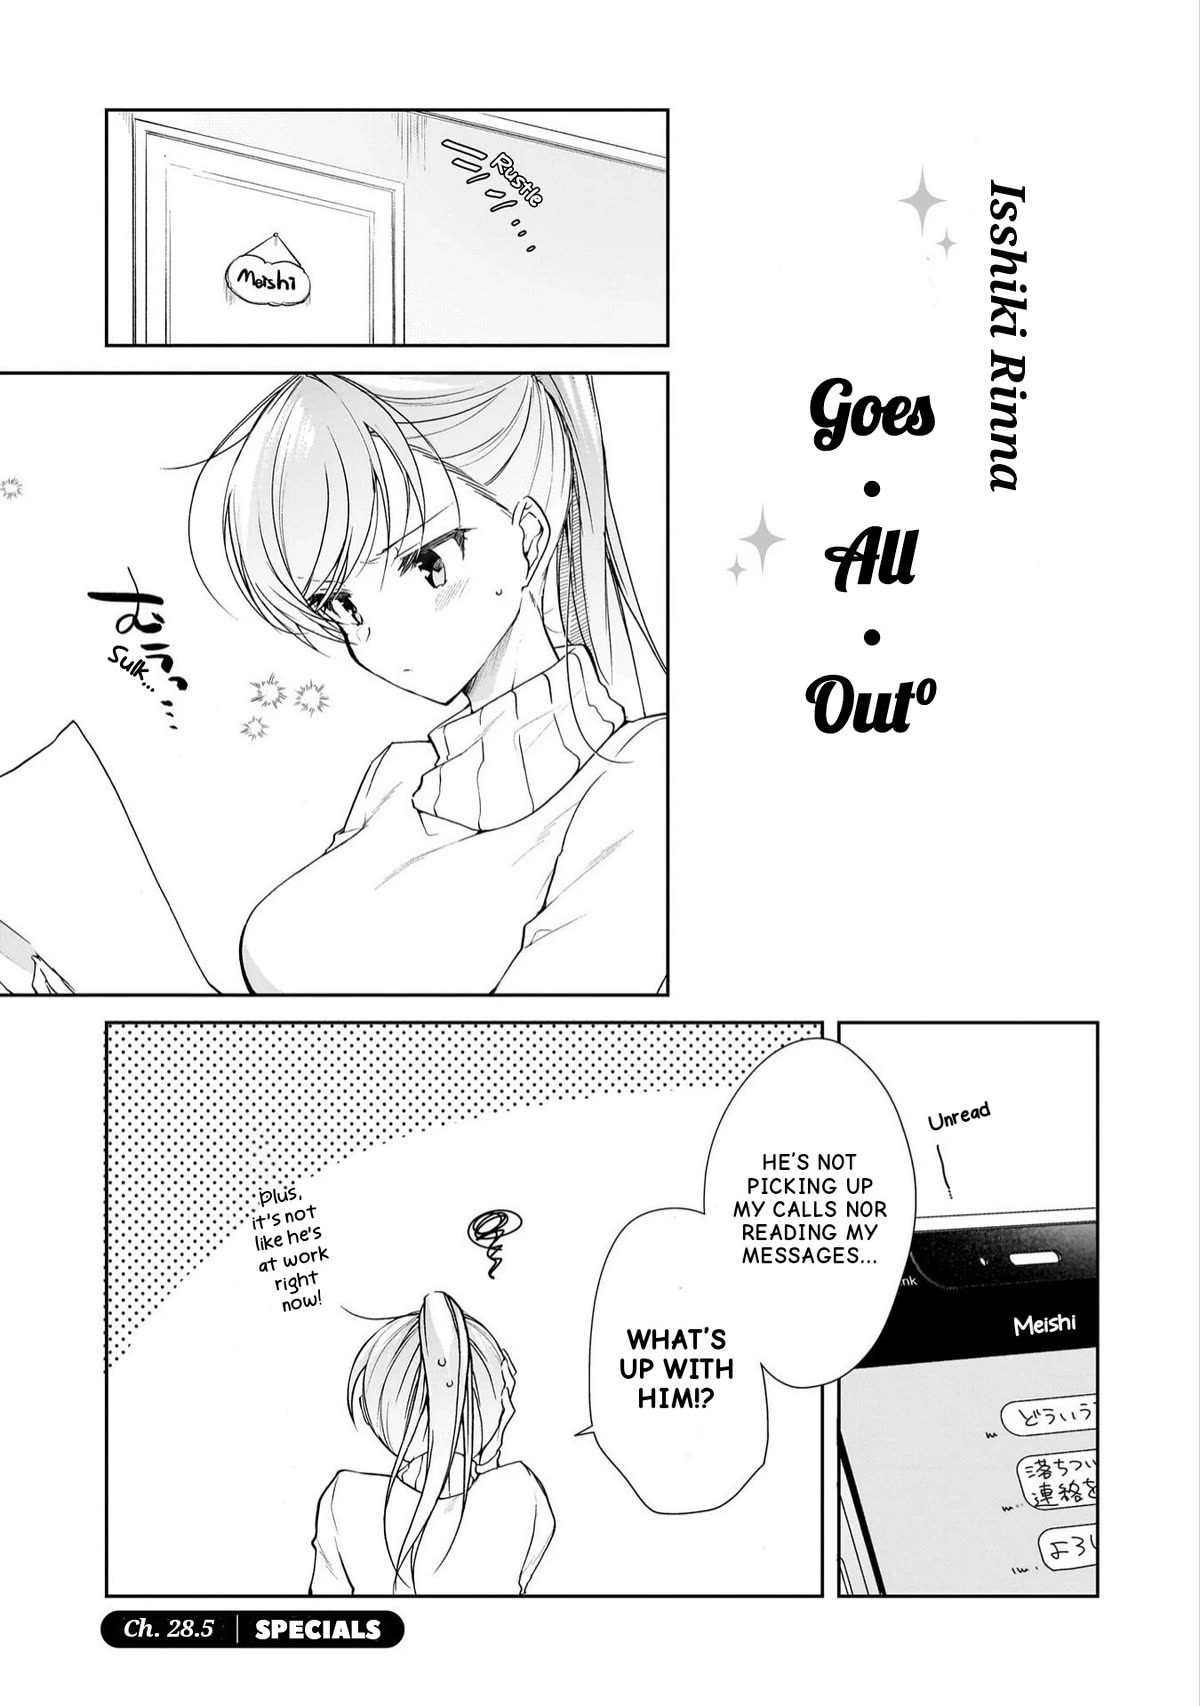 Isshiki-san Wants to Know About Love. - chapter 28.5 - #1